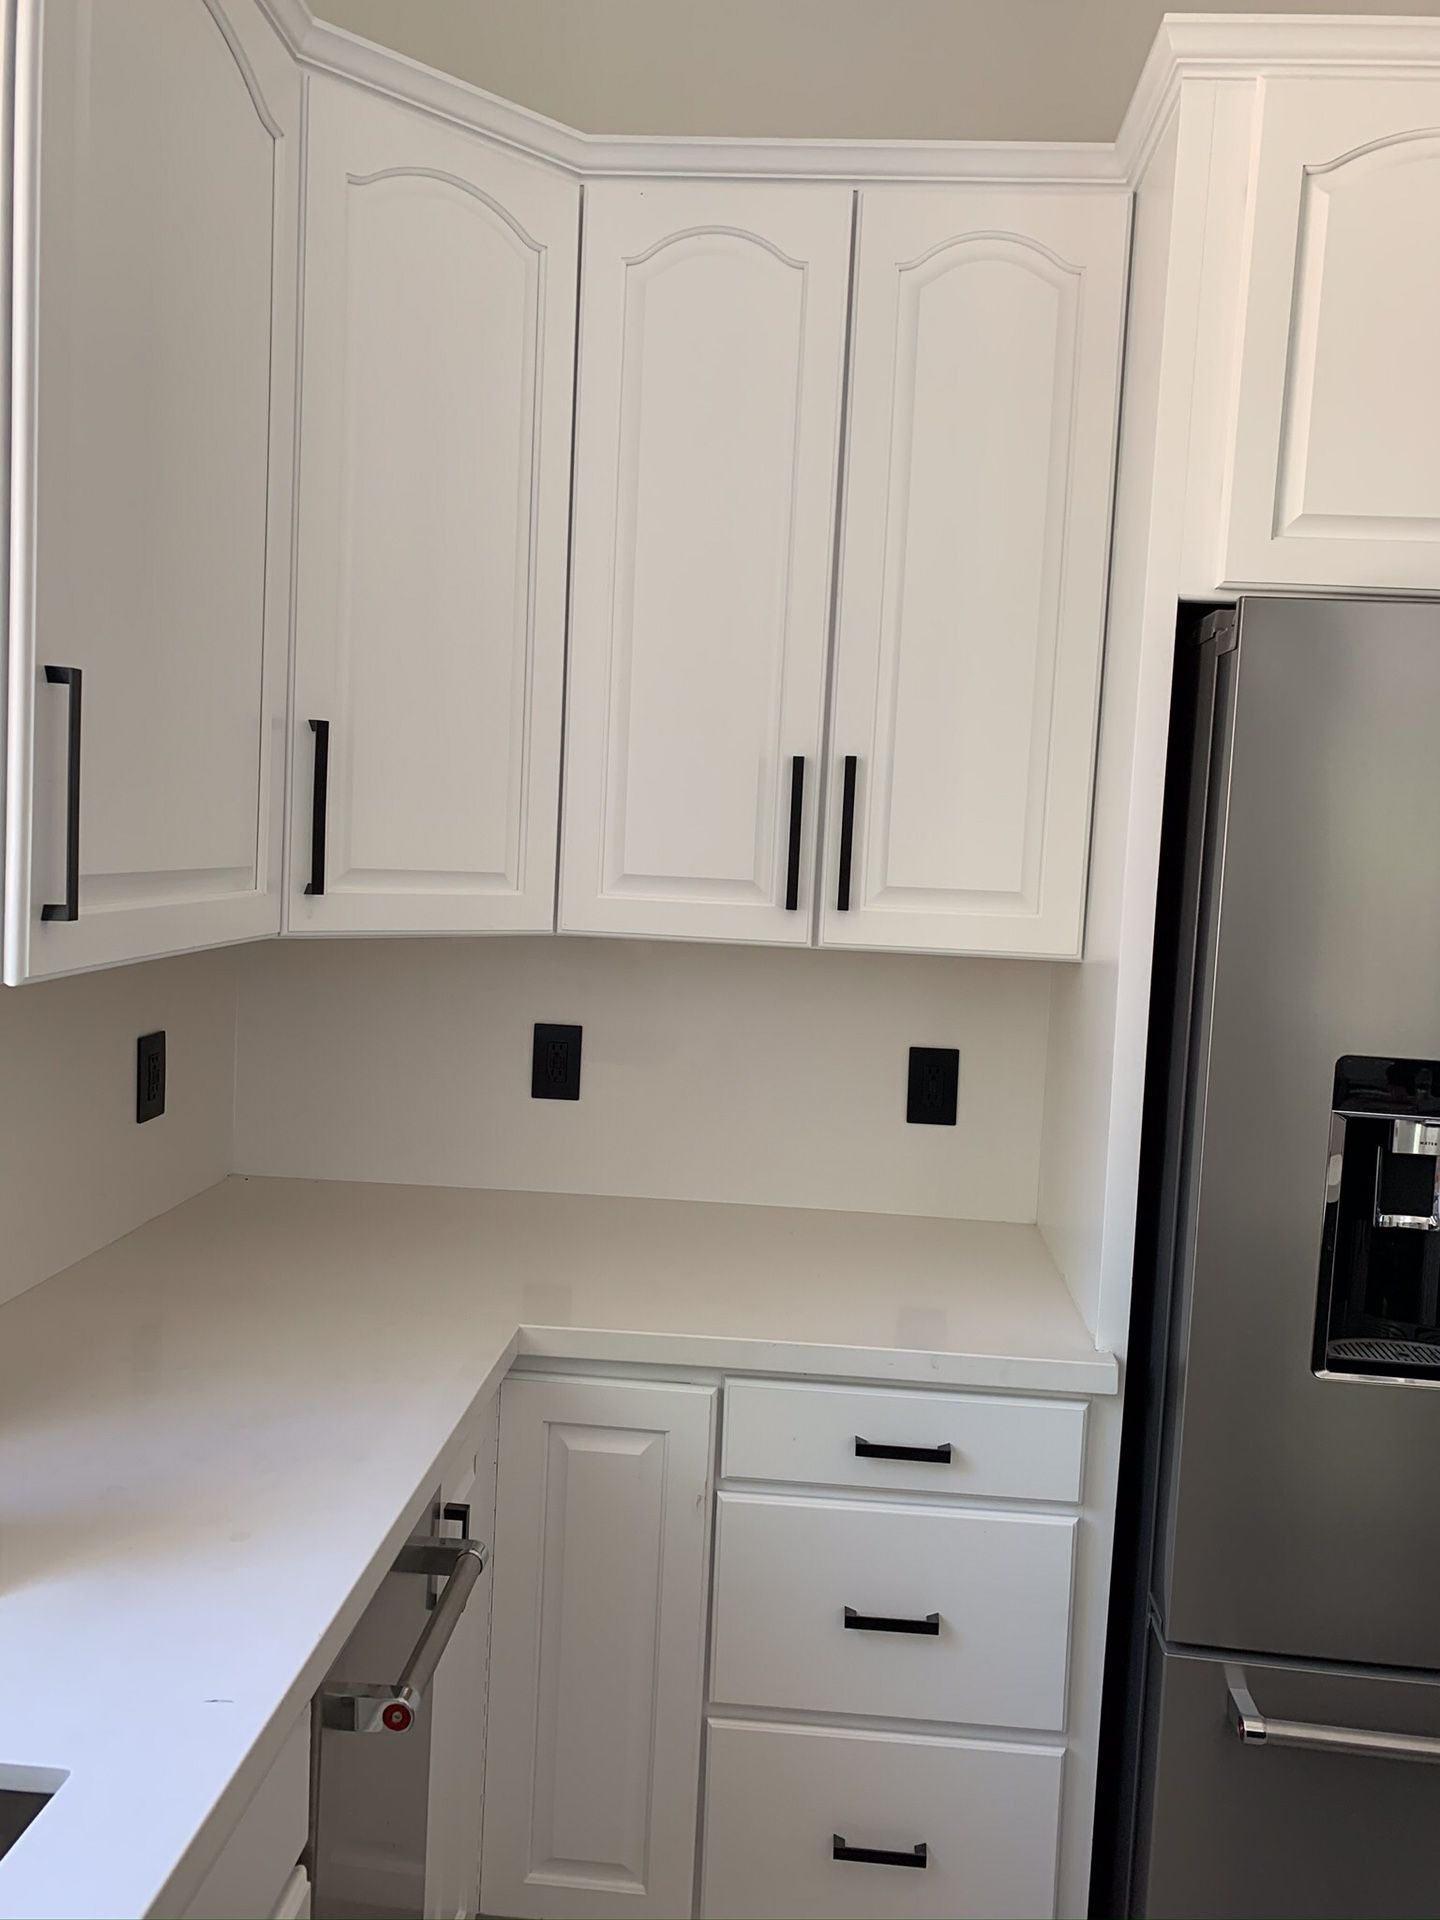 Kitchen cabinets and island with quartz countertop